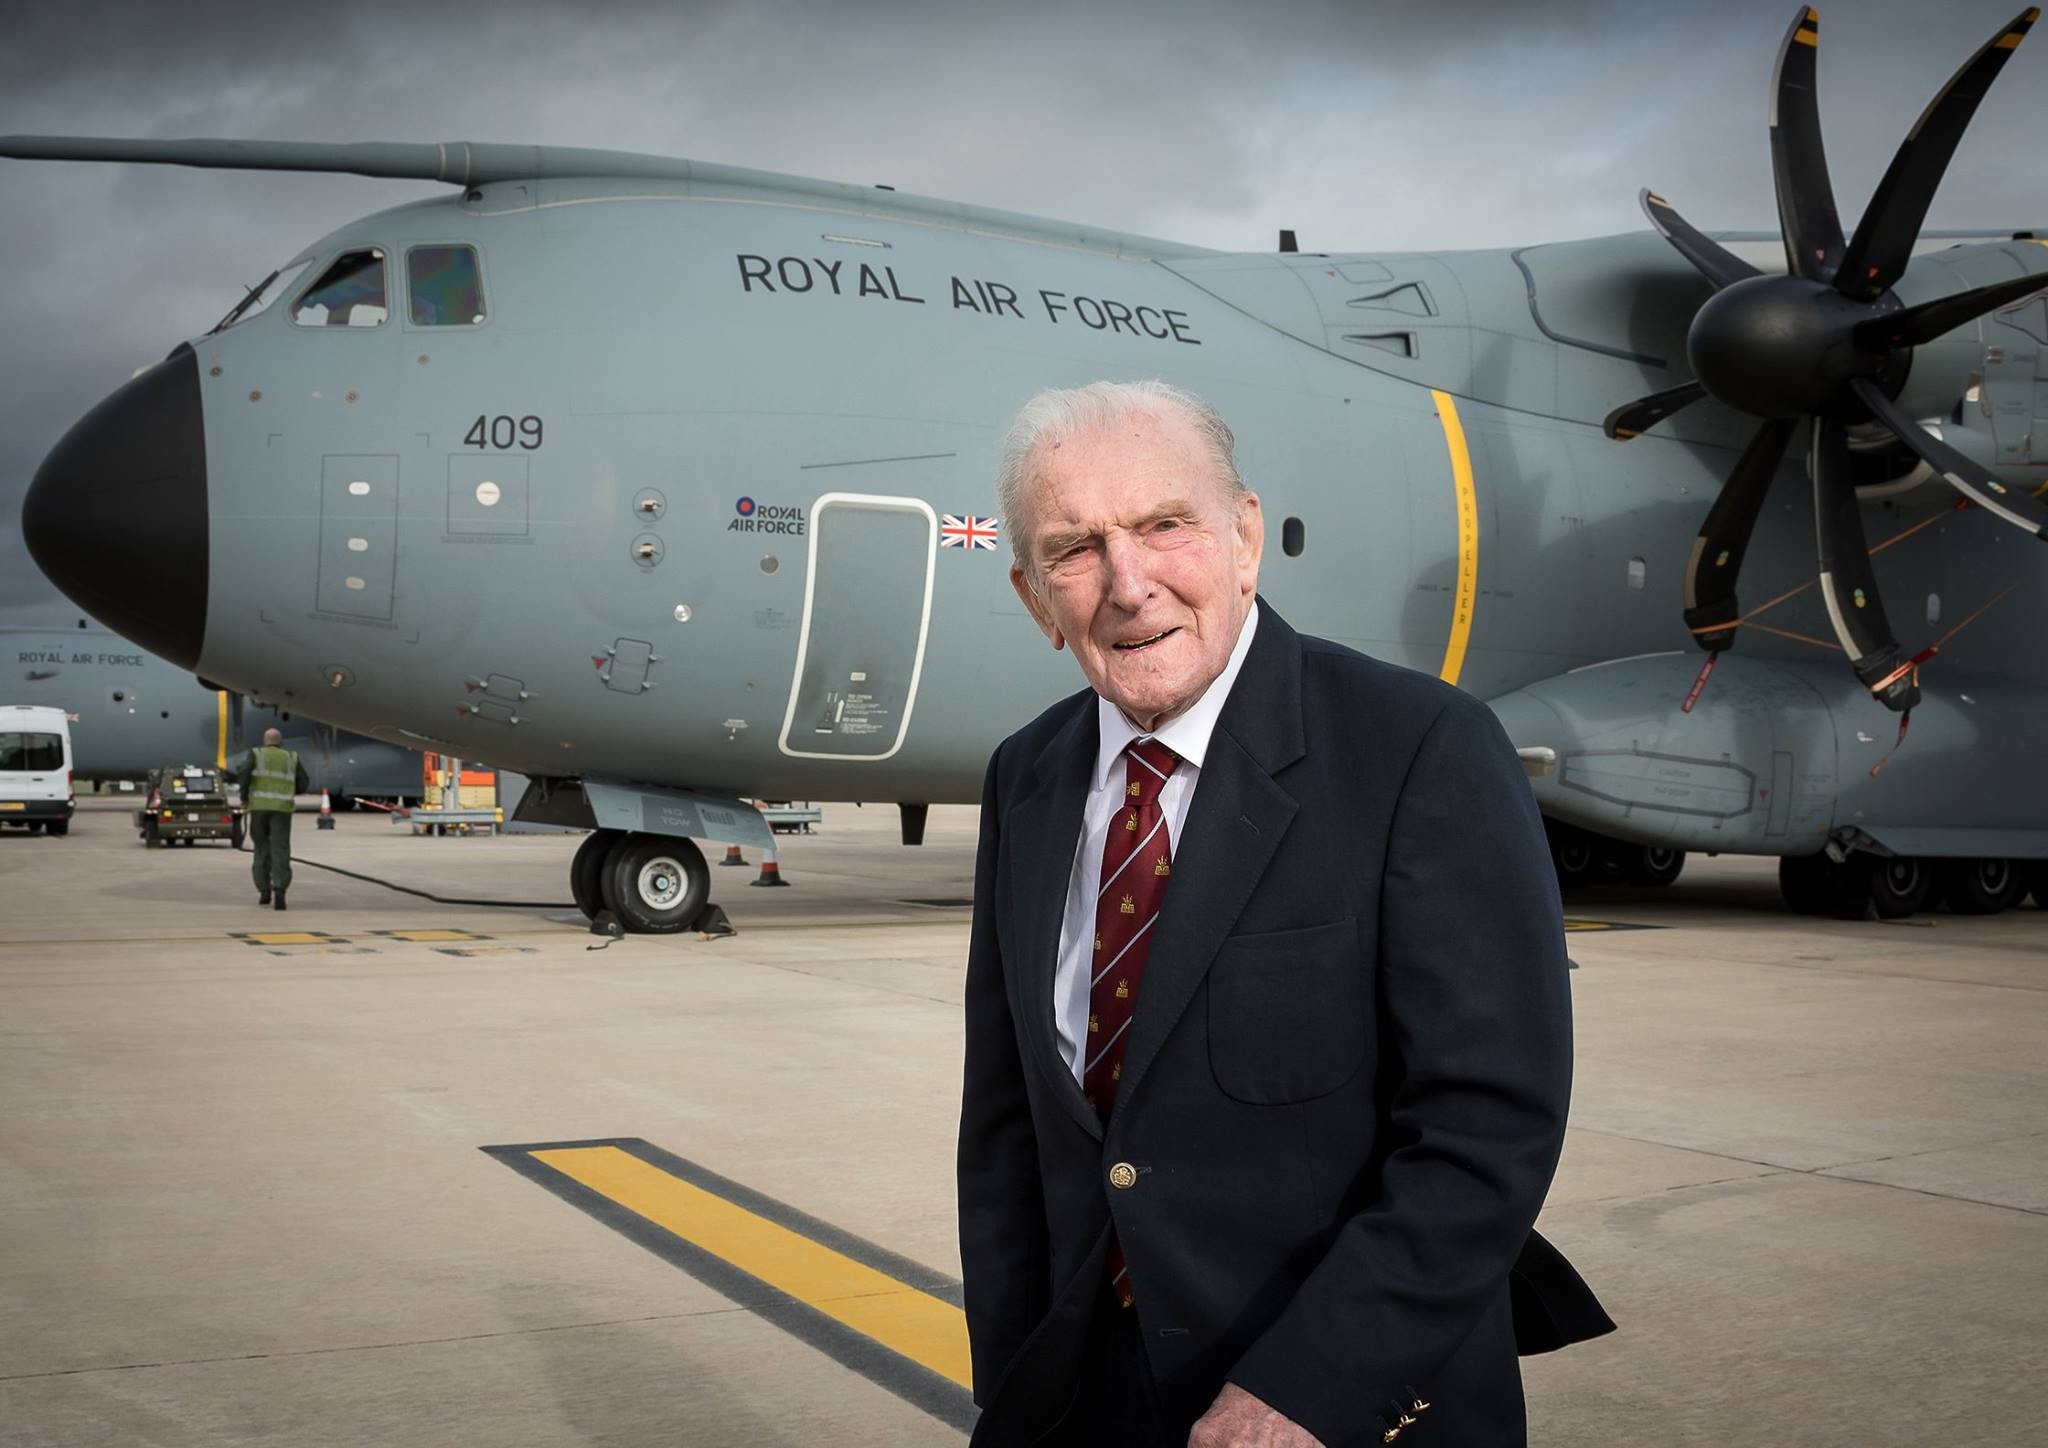 'Johnny' Johnson formerly of Dambusters 617 Squadron poses with Hercules aircraft.